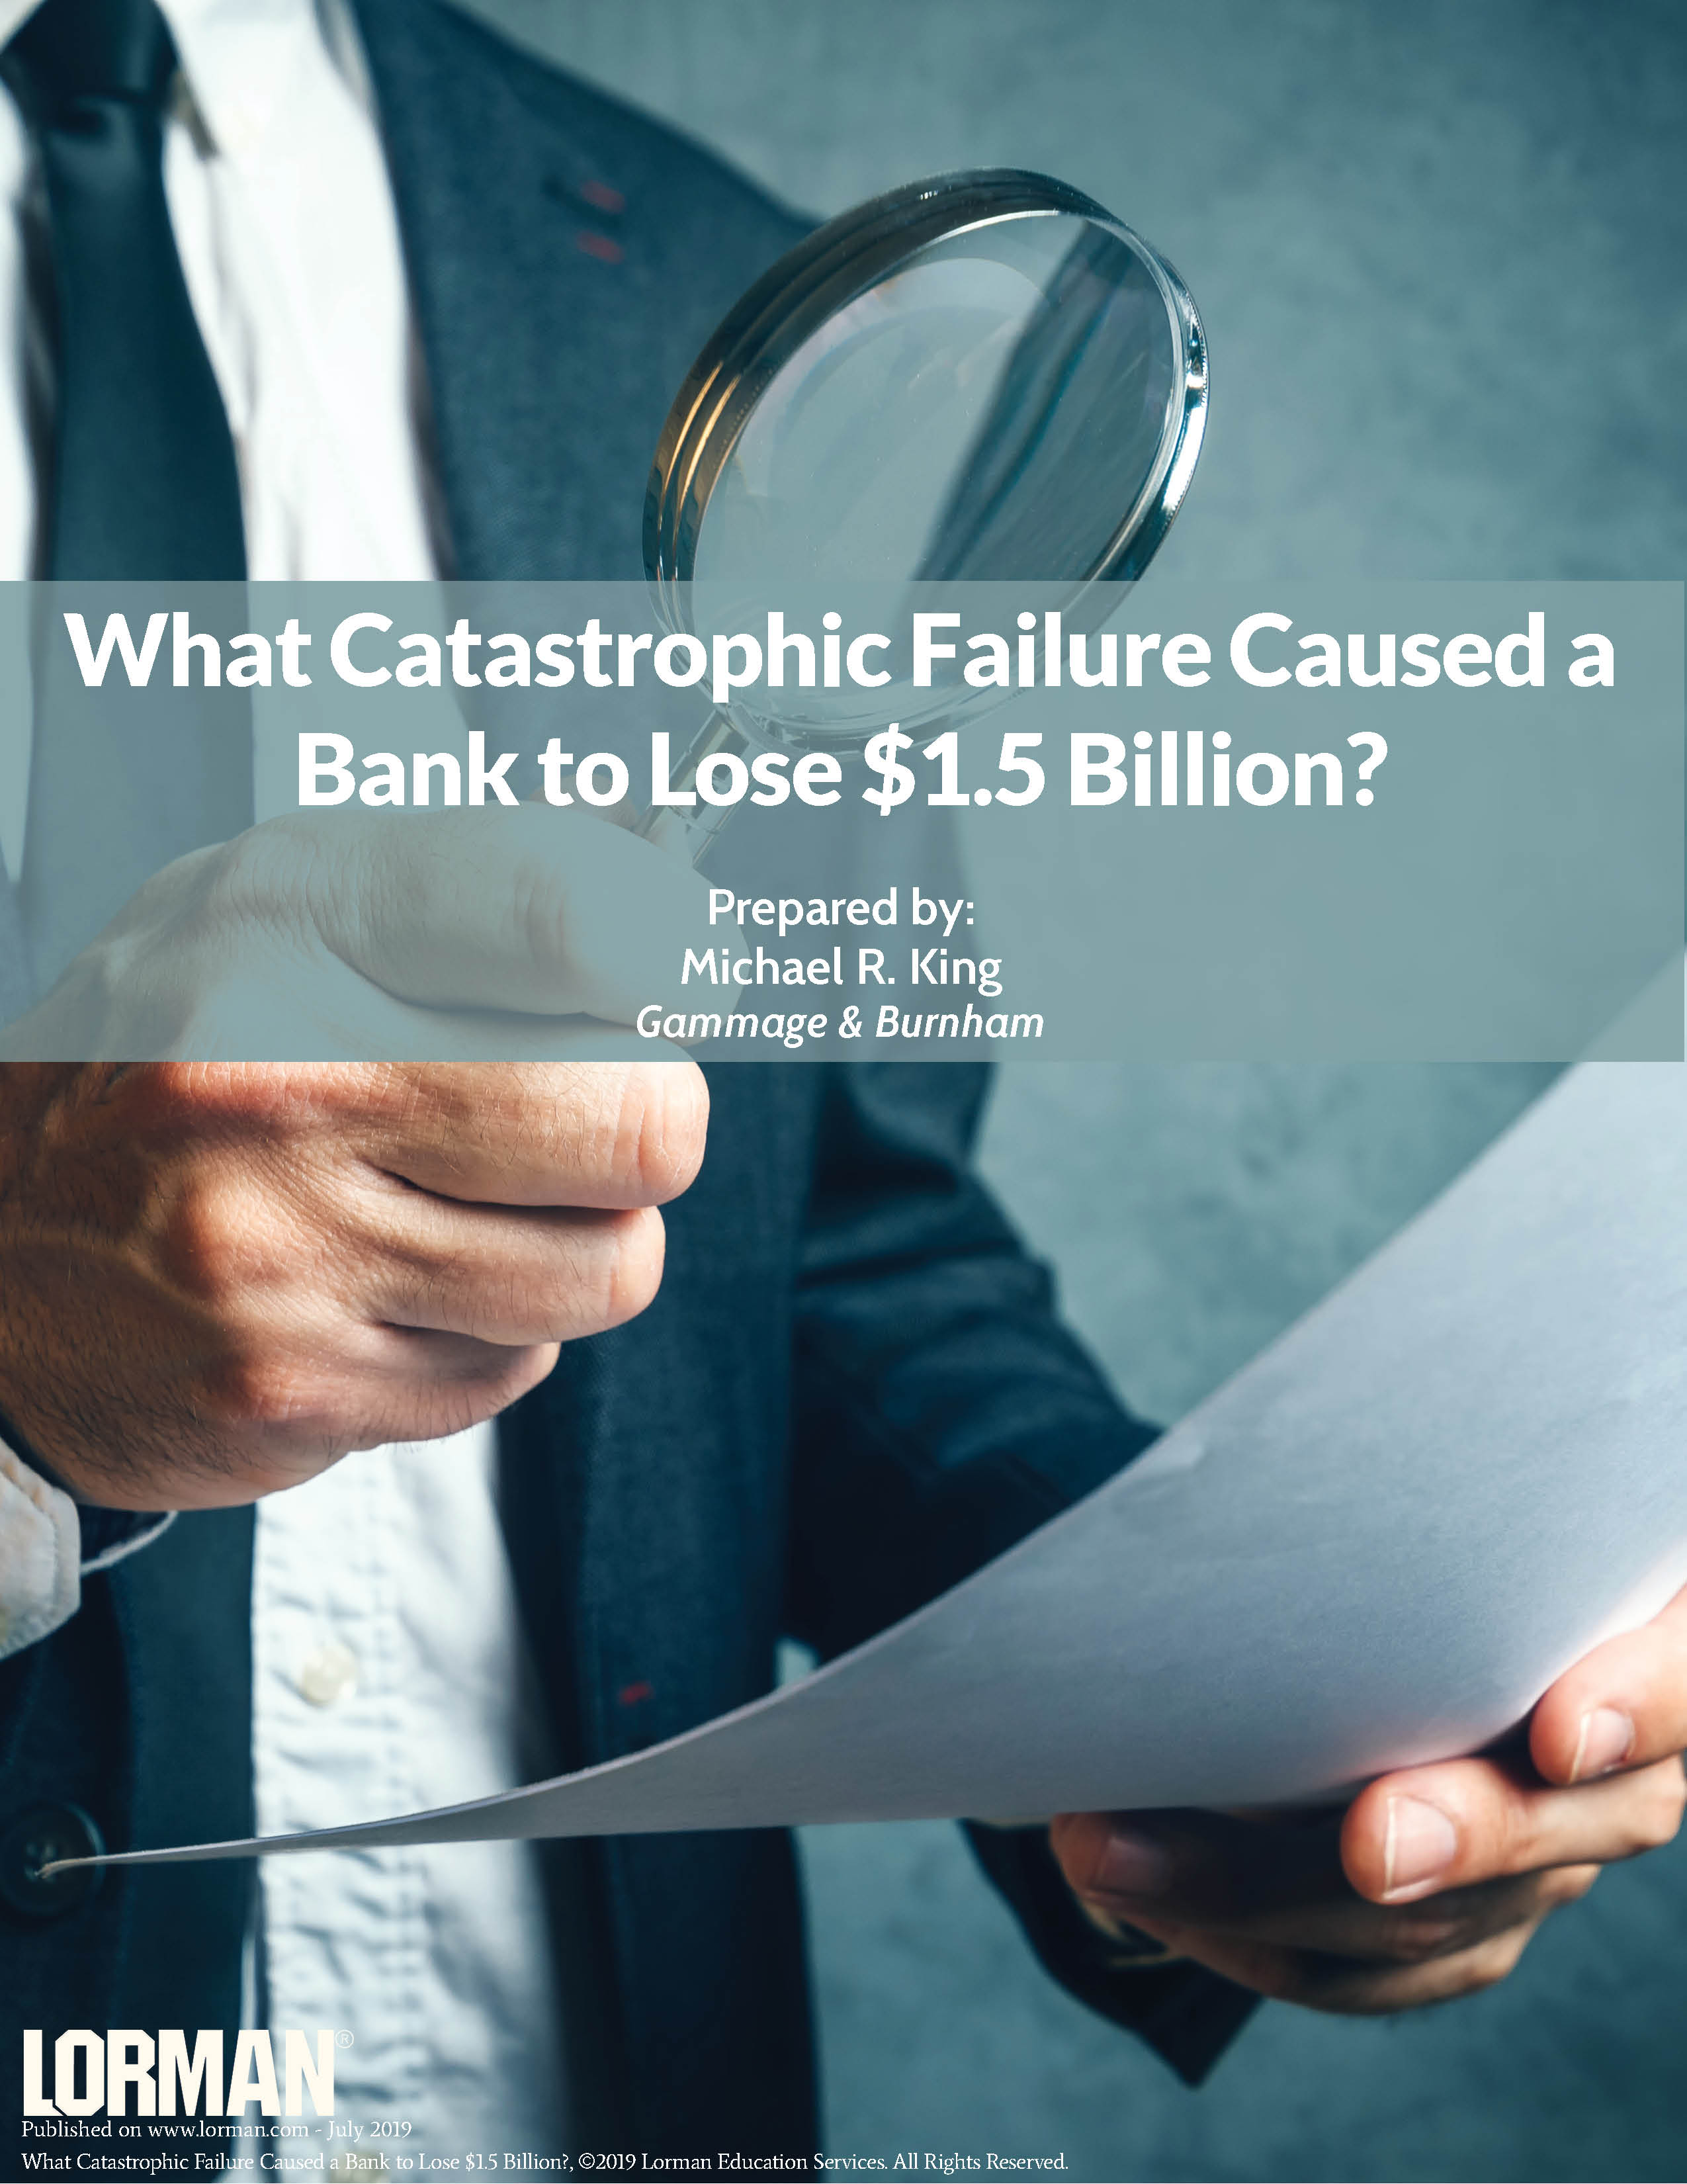 What Catastrophic Failure Caused a Bank to Lose $1.5 Billion?